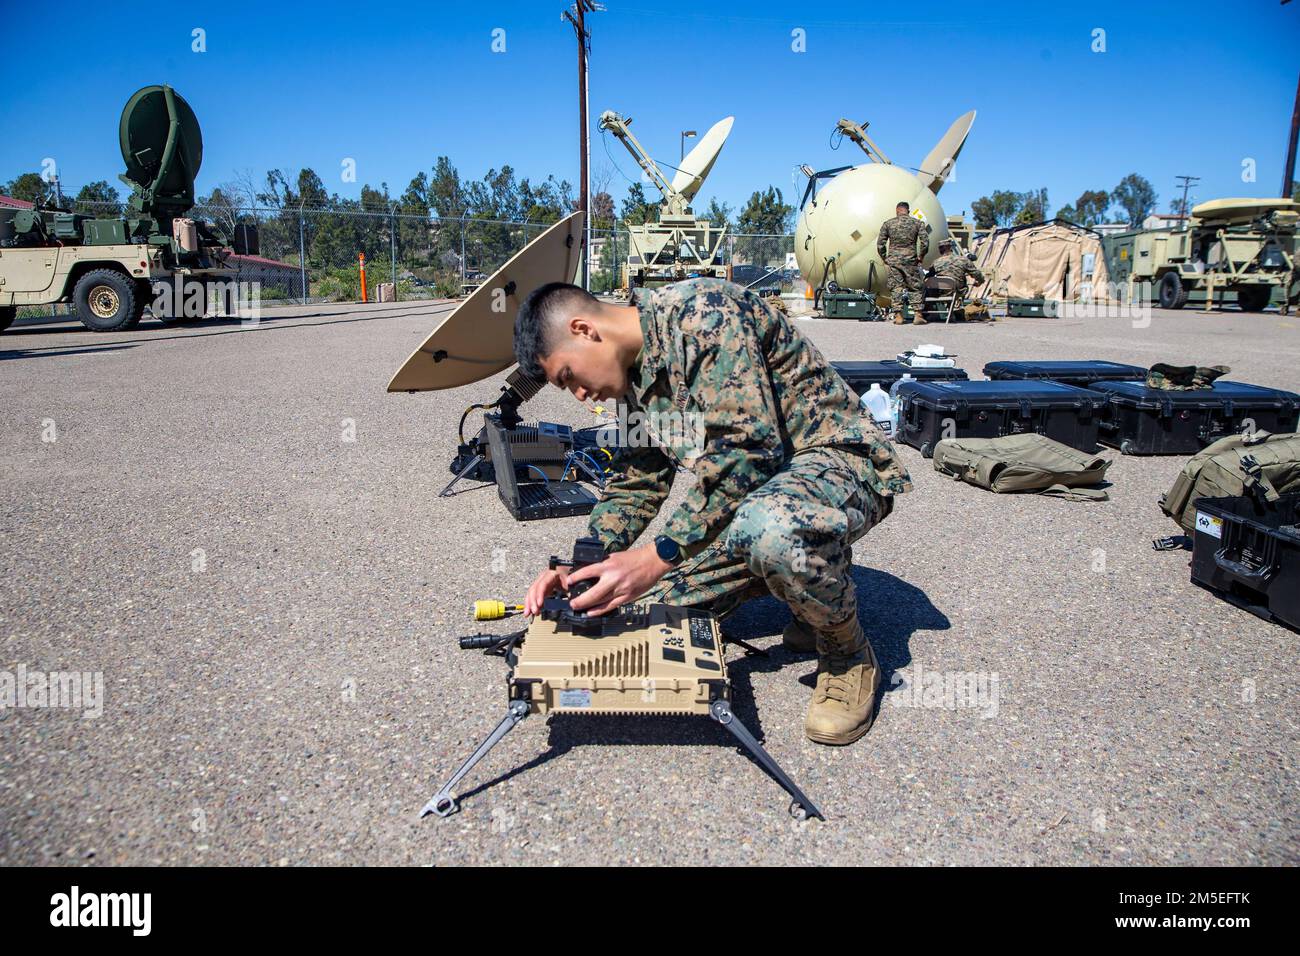 U.S. Marine Corps Lance Cpl. Marvin Diaz, a satellite communications operator with 9th Communication Battalion, I Marine Expeditionary Force Information Group, set up the Marine Corps Wideband Satellite Communications - Expeditionary at Marine Corps Base Camp Pendleton, California, March 11, 2022. This training allows the 9th Communication Battalion to be capable of operating, defending, and preserving information networks to enable command and control for the commander in all domains, and support and conduct Marine Air Ground Task Force operations in the information environment. Stock Photo